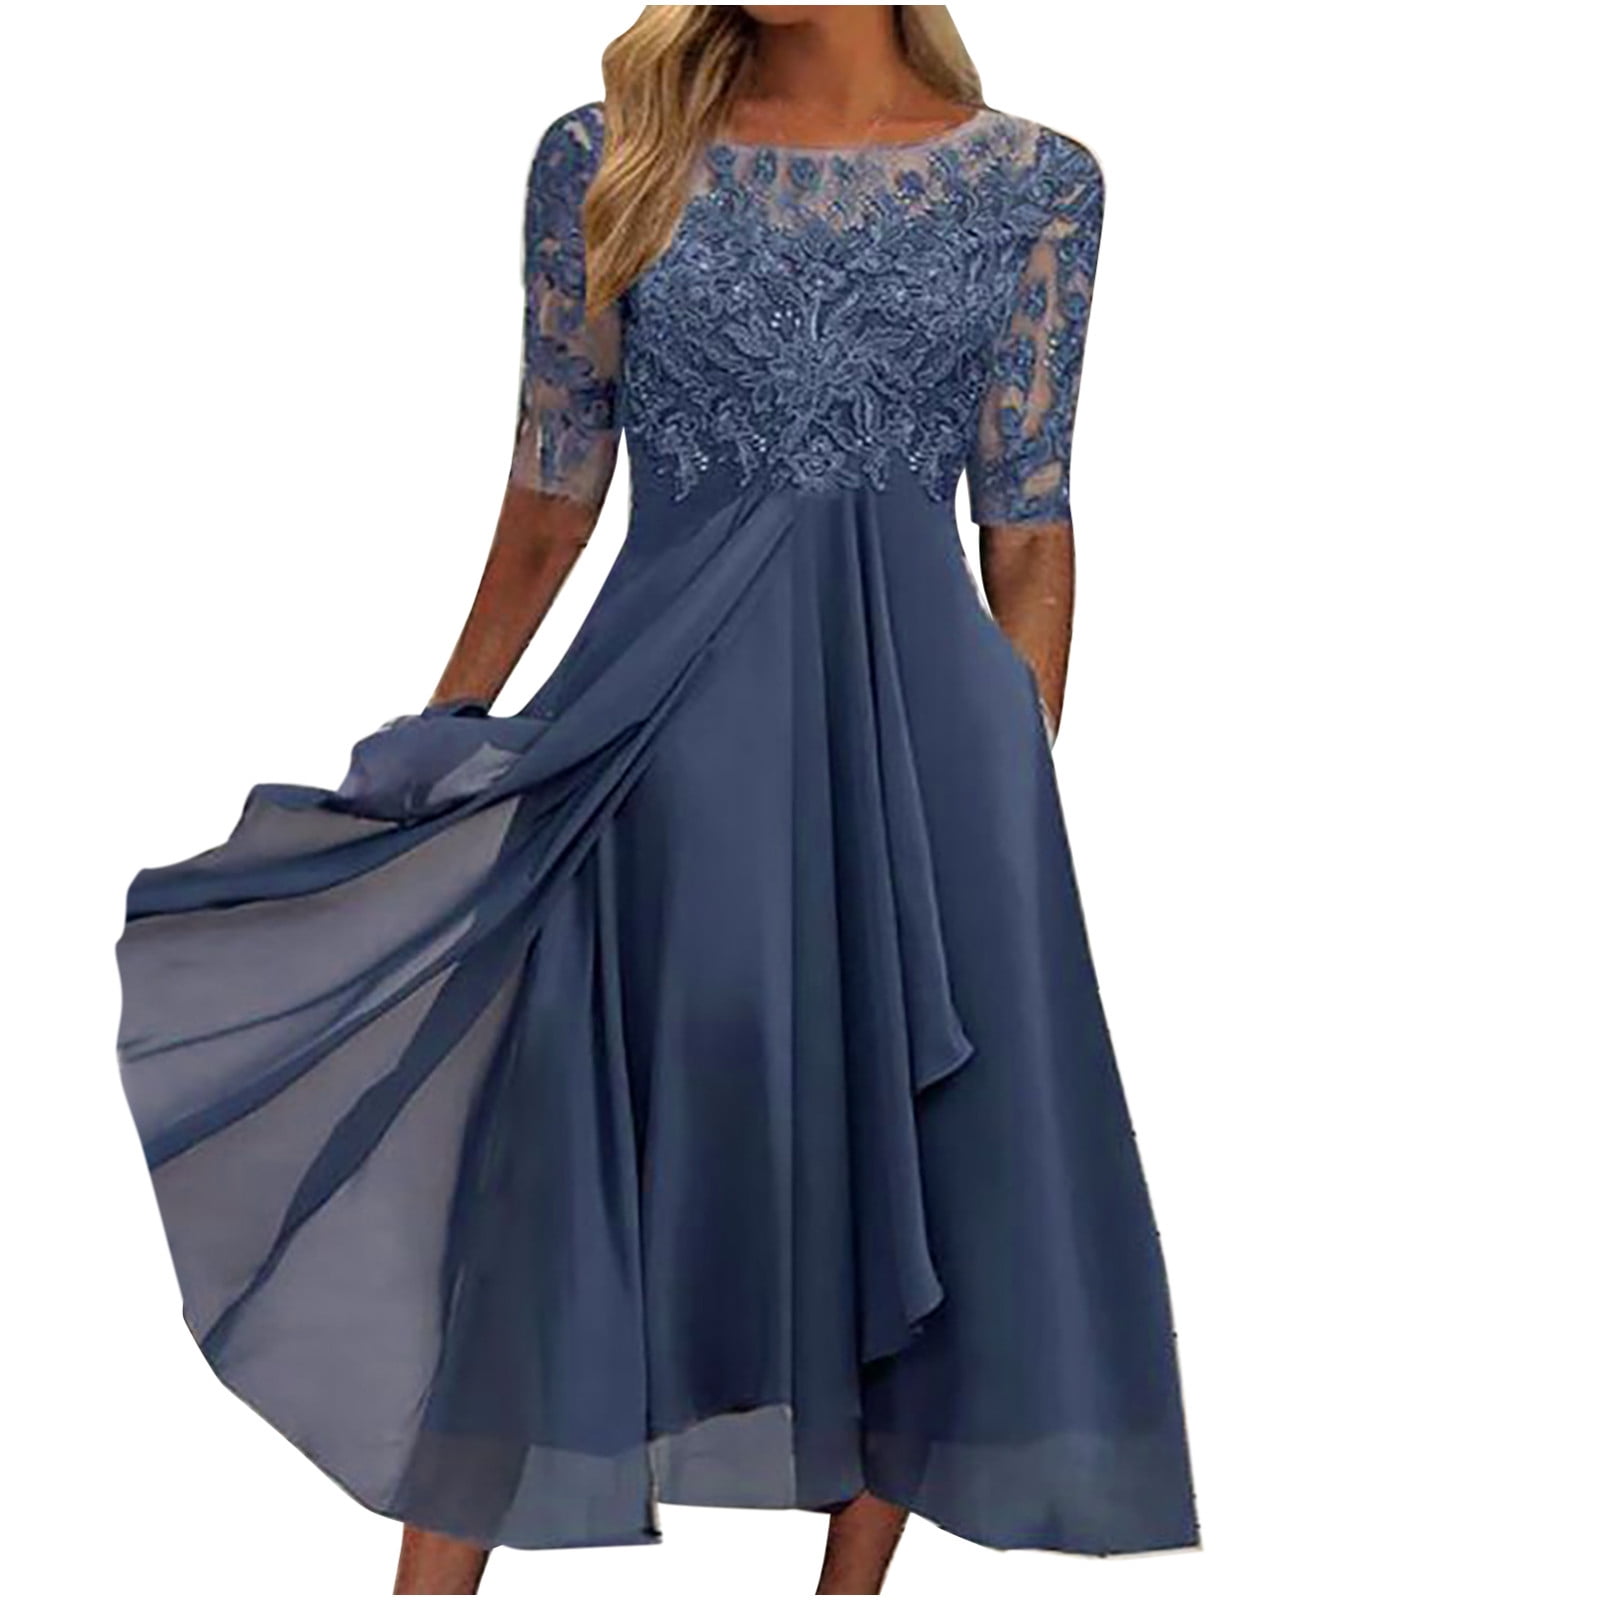 Wedding Guest Dresses for Women Fall Half Sleeve Mesh Lace Evening ...